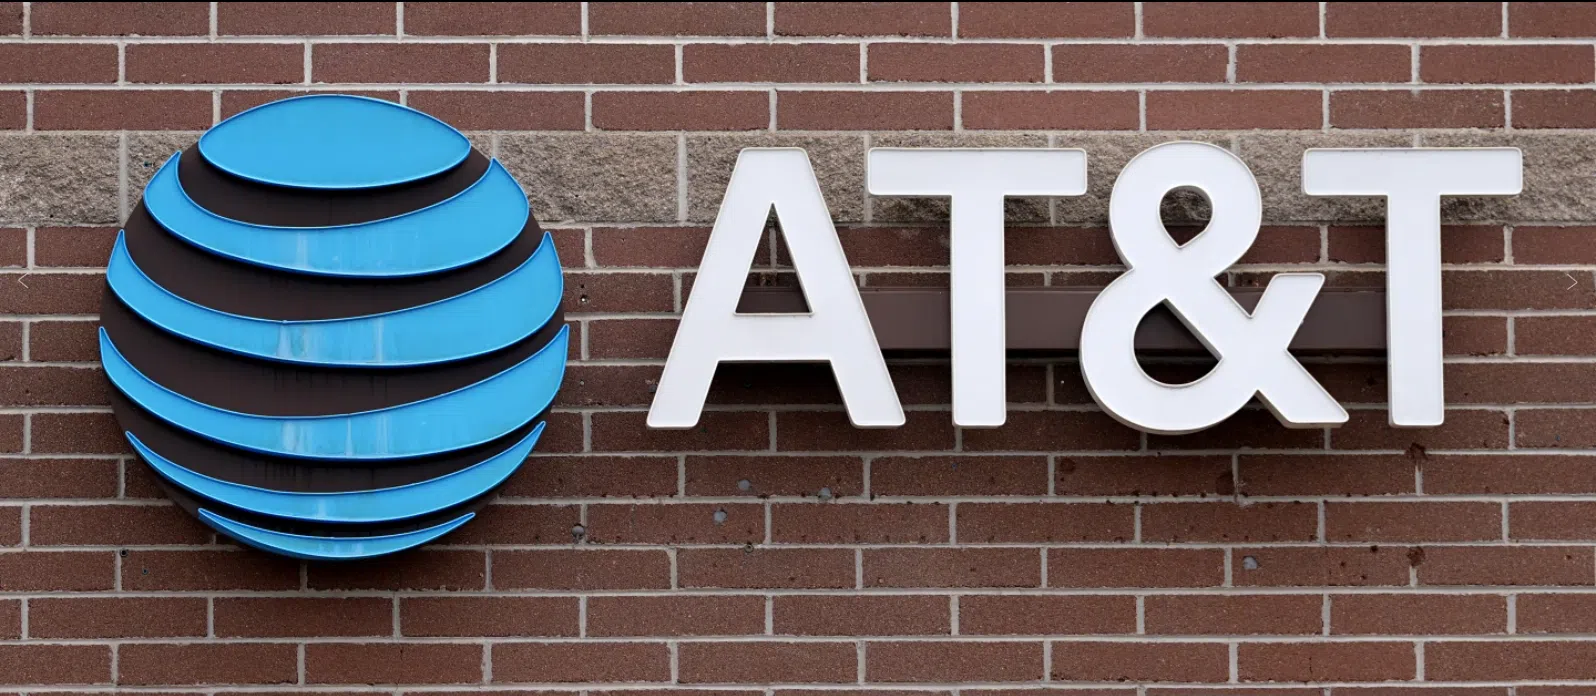 AT&T says a data breach leaked millions of customers' information online